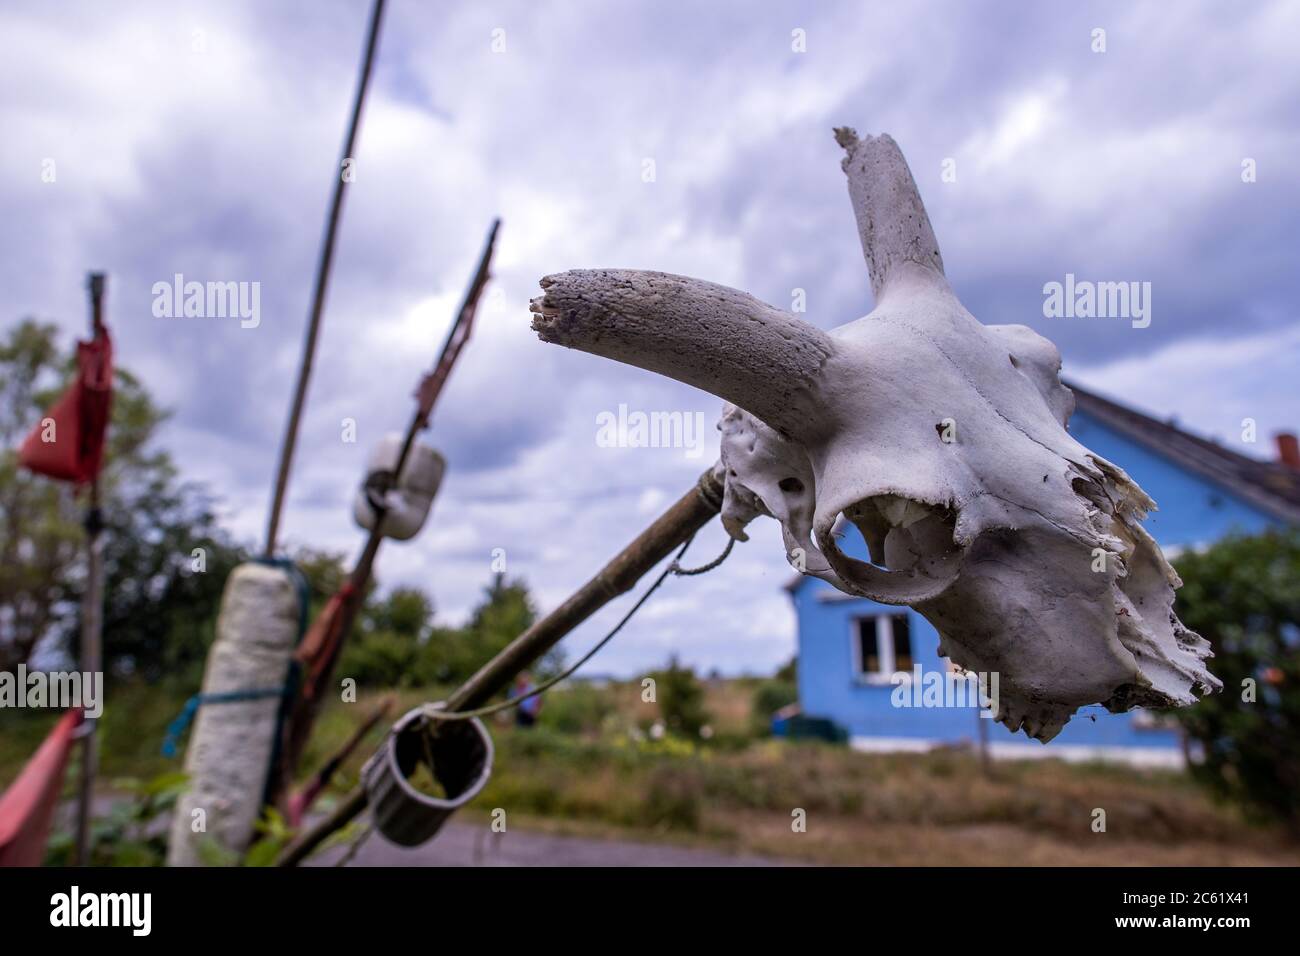 Greifswald, Germany. 02nd July, 2020. The skull of a sheep hangs on a wooden pole on the nature conservation island Koos in the Greifswald Bodden. After the renaturation, animal and plant species that were thought to be lost have returned to the island in recent years. The Succow Foundation was established in 1999 as the first non-profit nature conservation foundation in the new German states. In 2016 it took over 365 hectares on the island and in the Karrendorf meadows on the mainland. Credit: Jens Büttner/dpa-Zentralbild/ZB/dpa/Alamy Live News Stock Photo